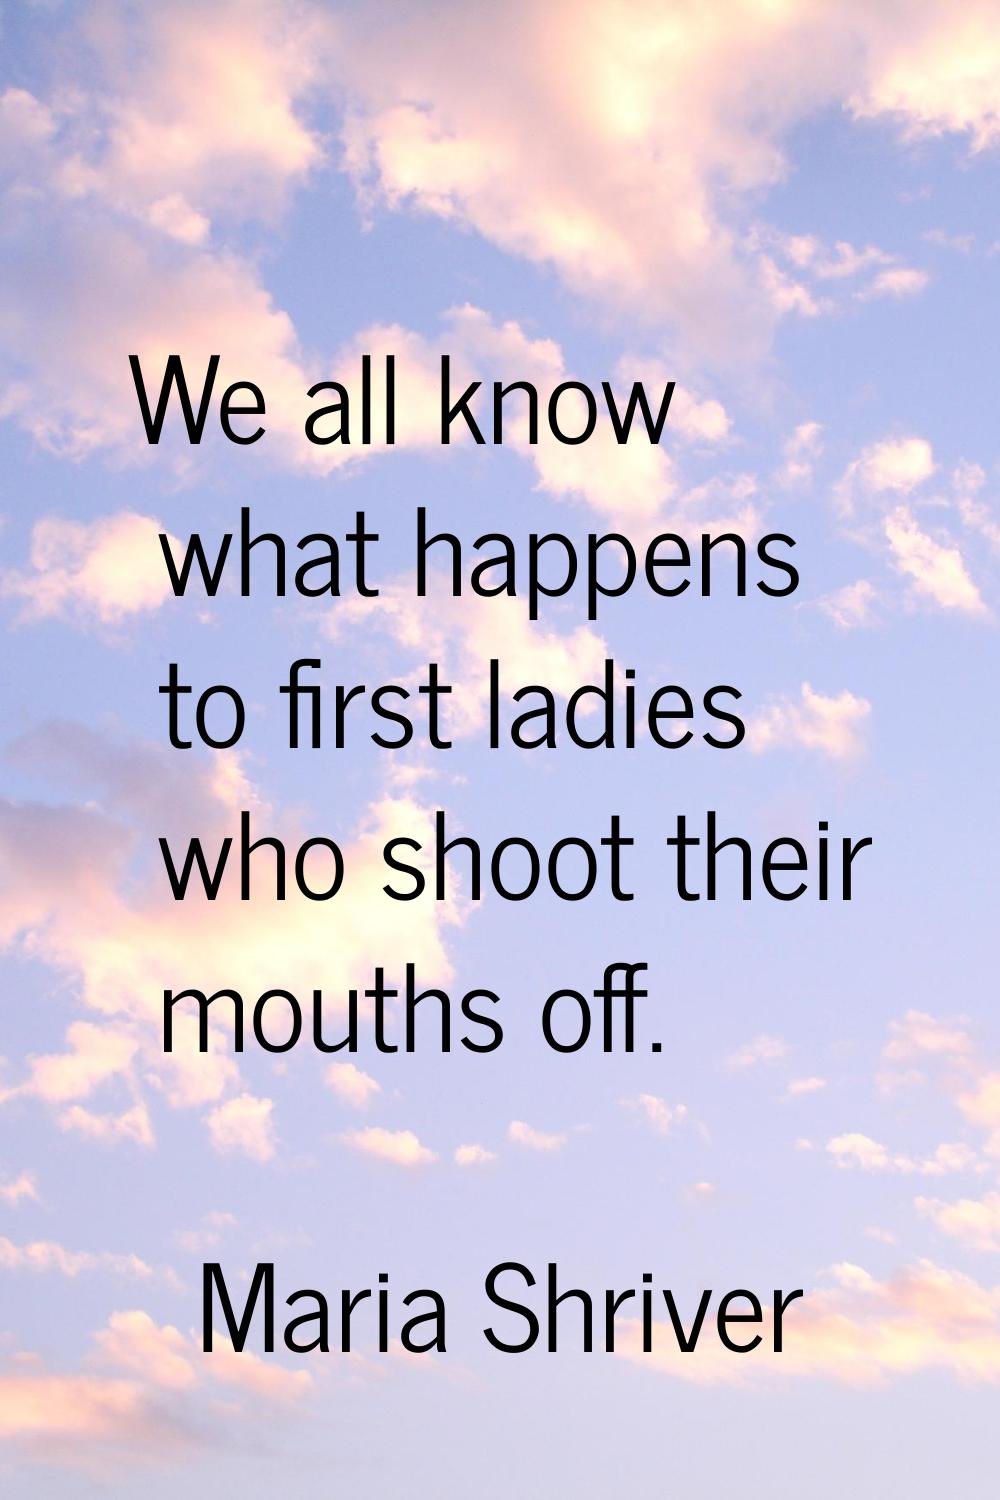 We all know what happens to first ladies who shoot their mouths off.